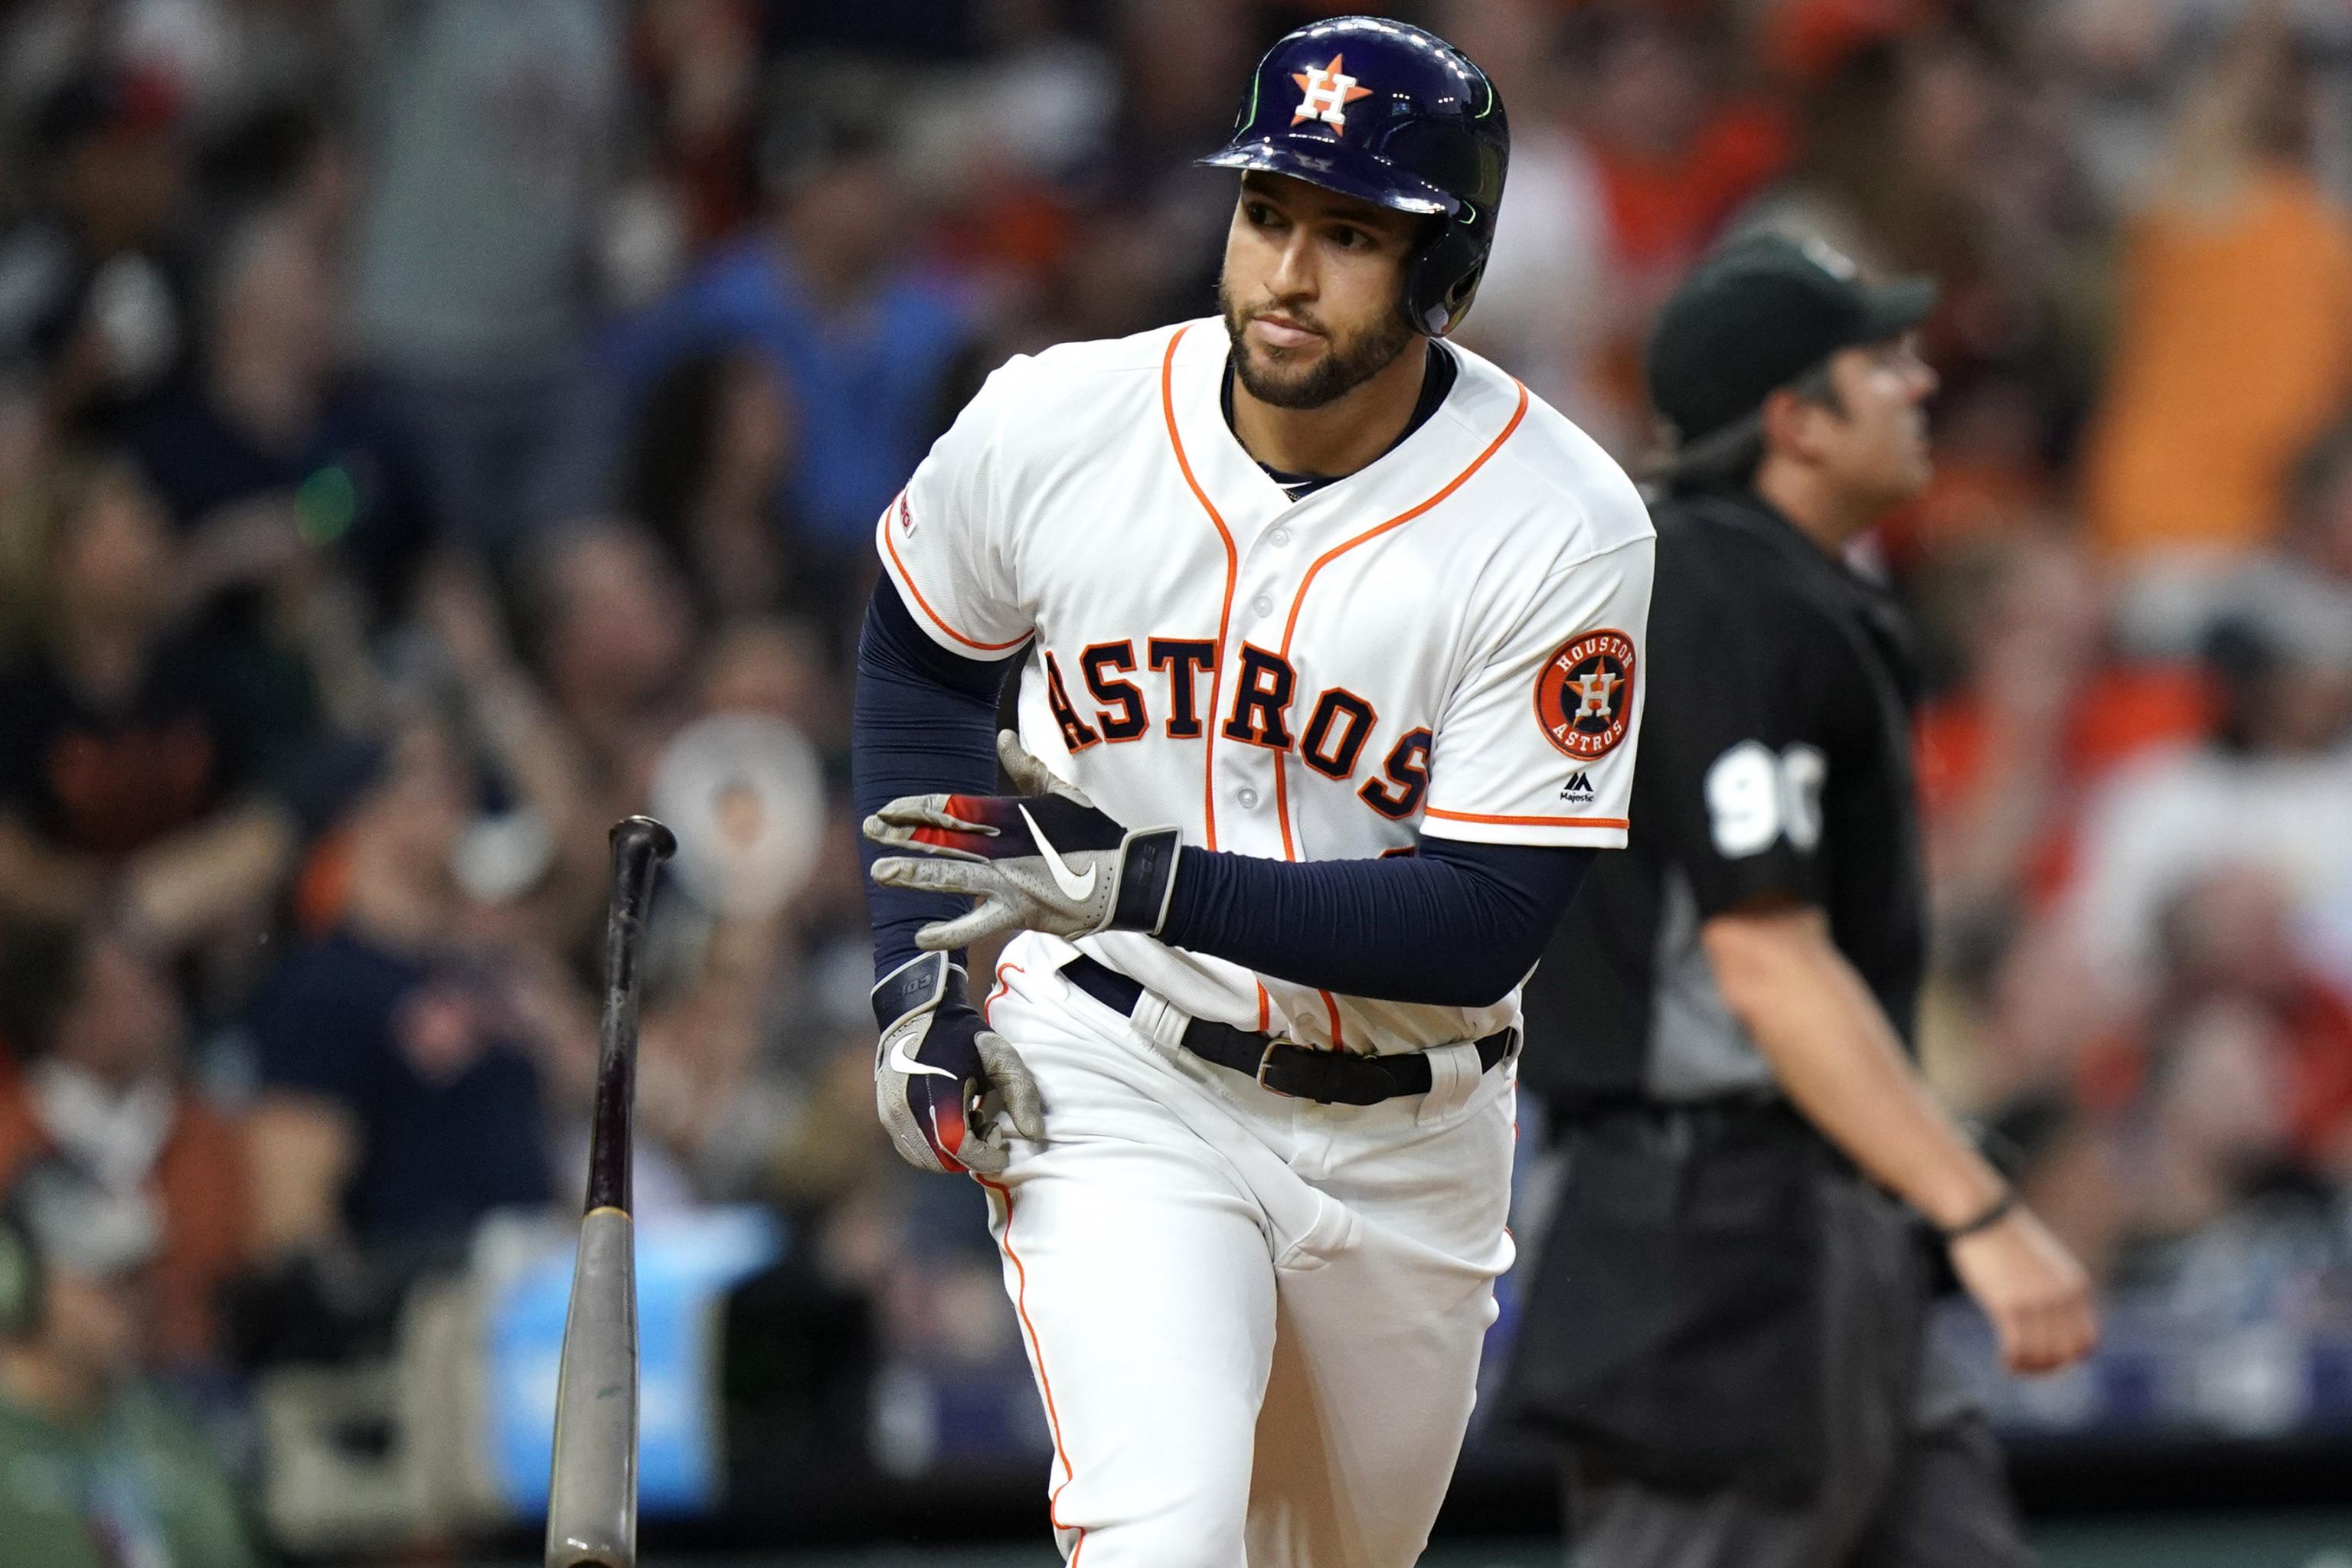 Astros' George Springer exits game after hit by pitch